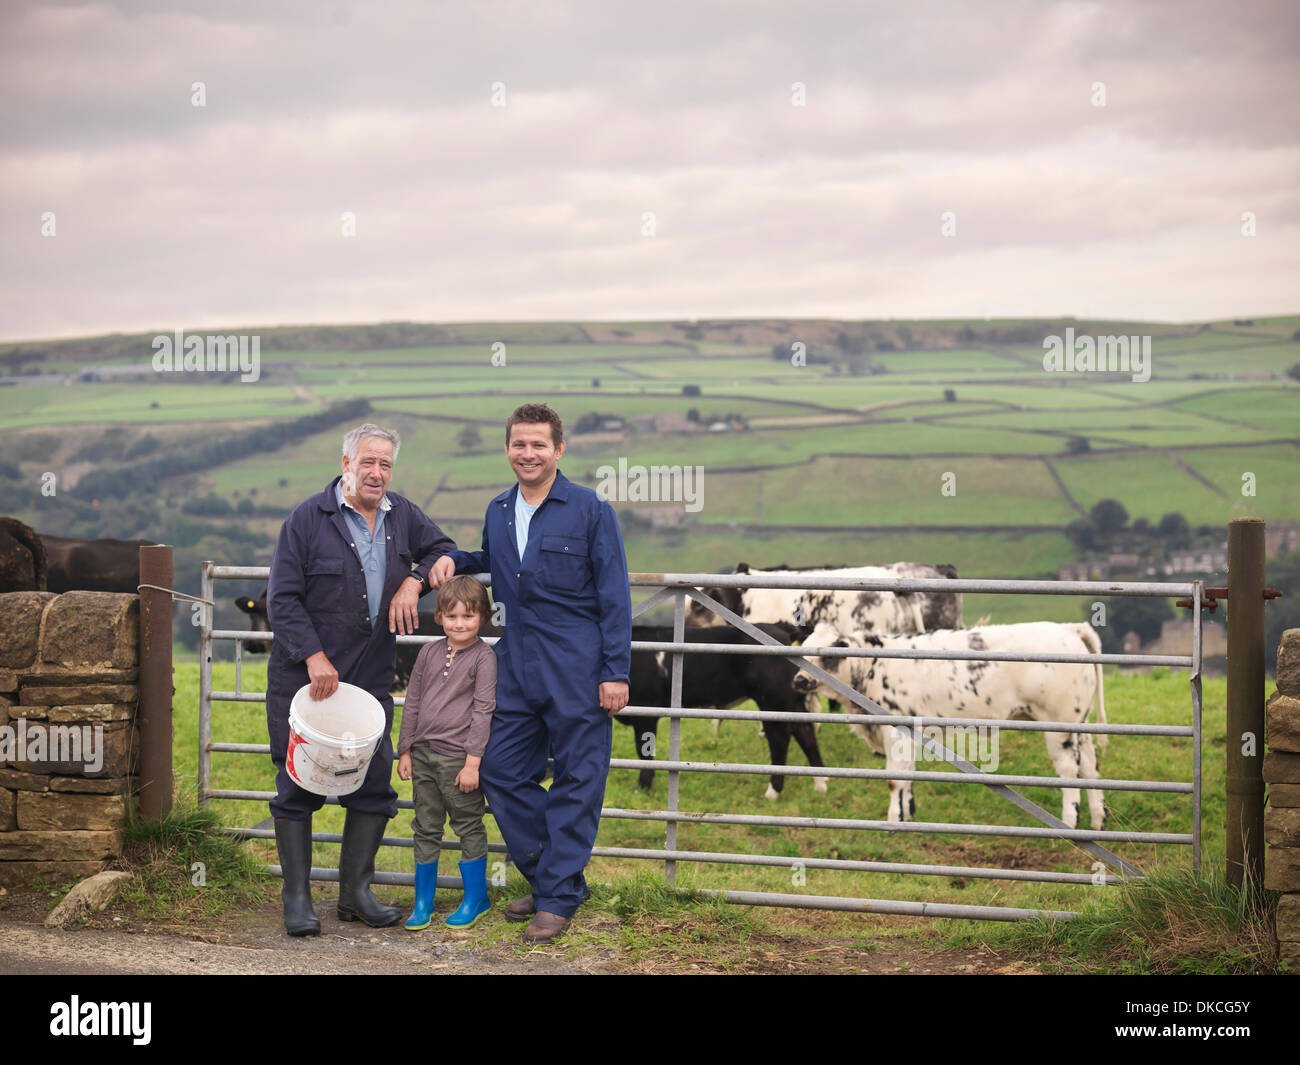 Mature farmer, adult son and grandson standing together at gate to cow field, portrait Stock Photo